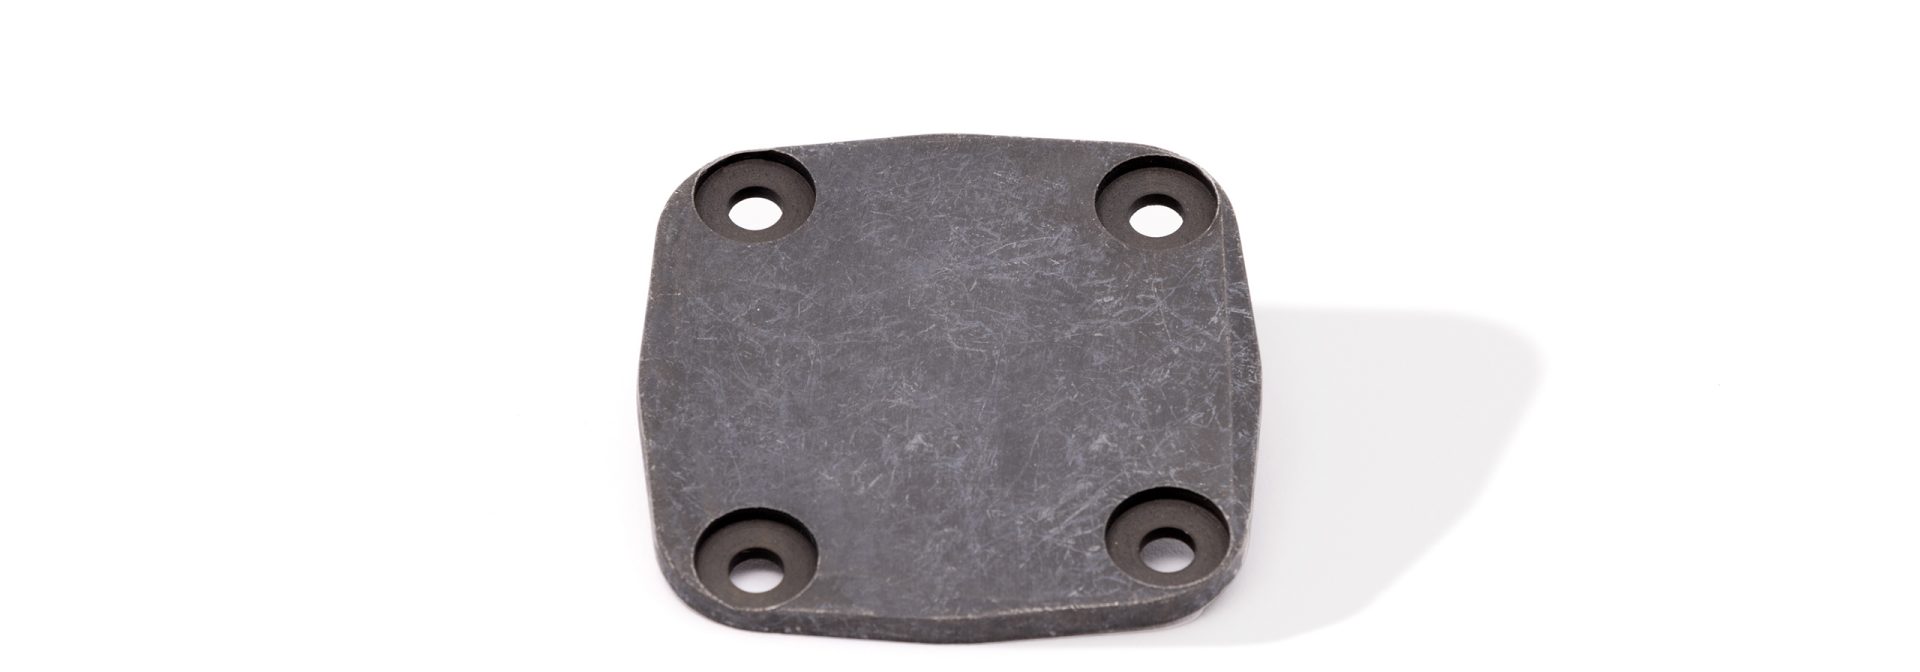 BMW Classic motorcycle reproduction oil pump cover